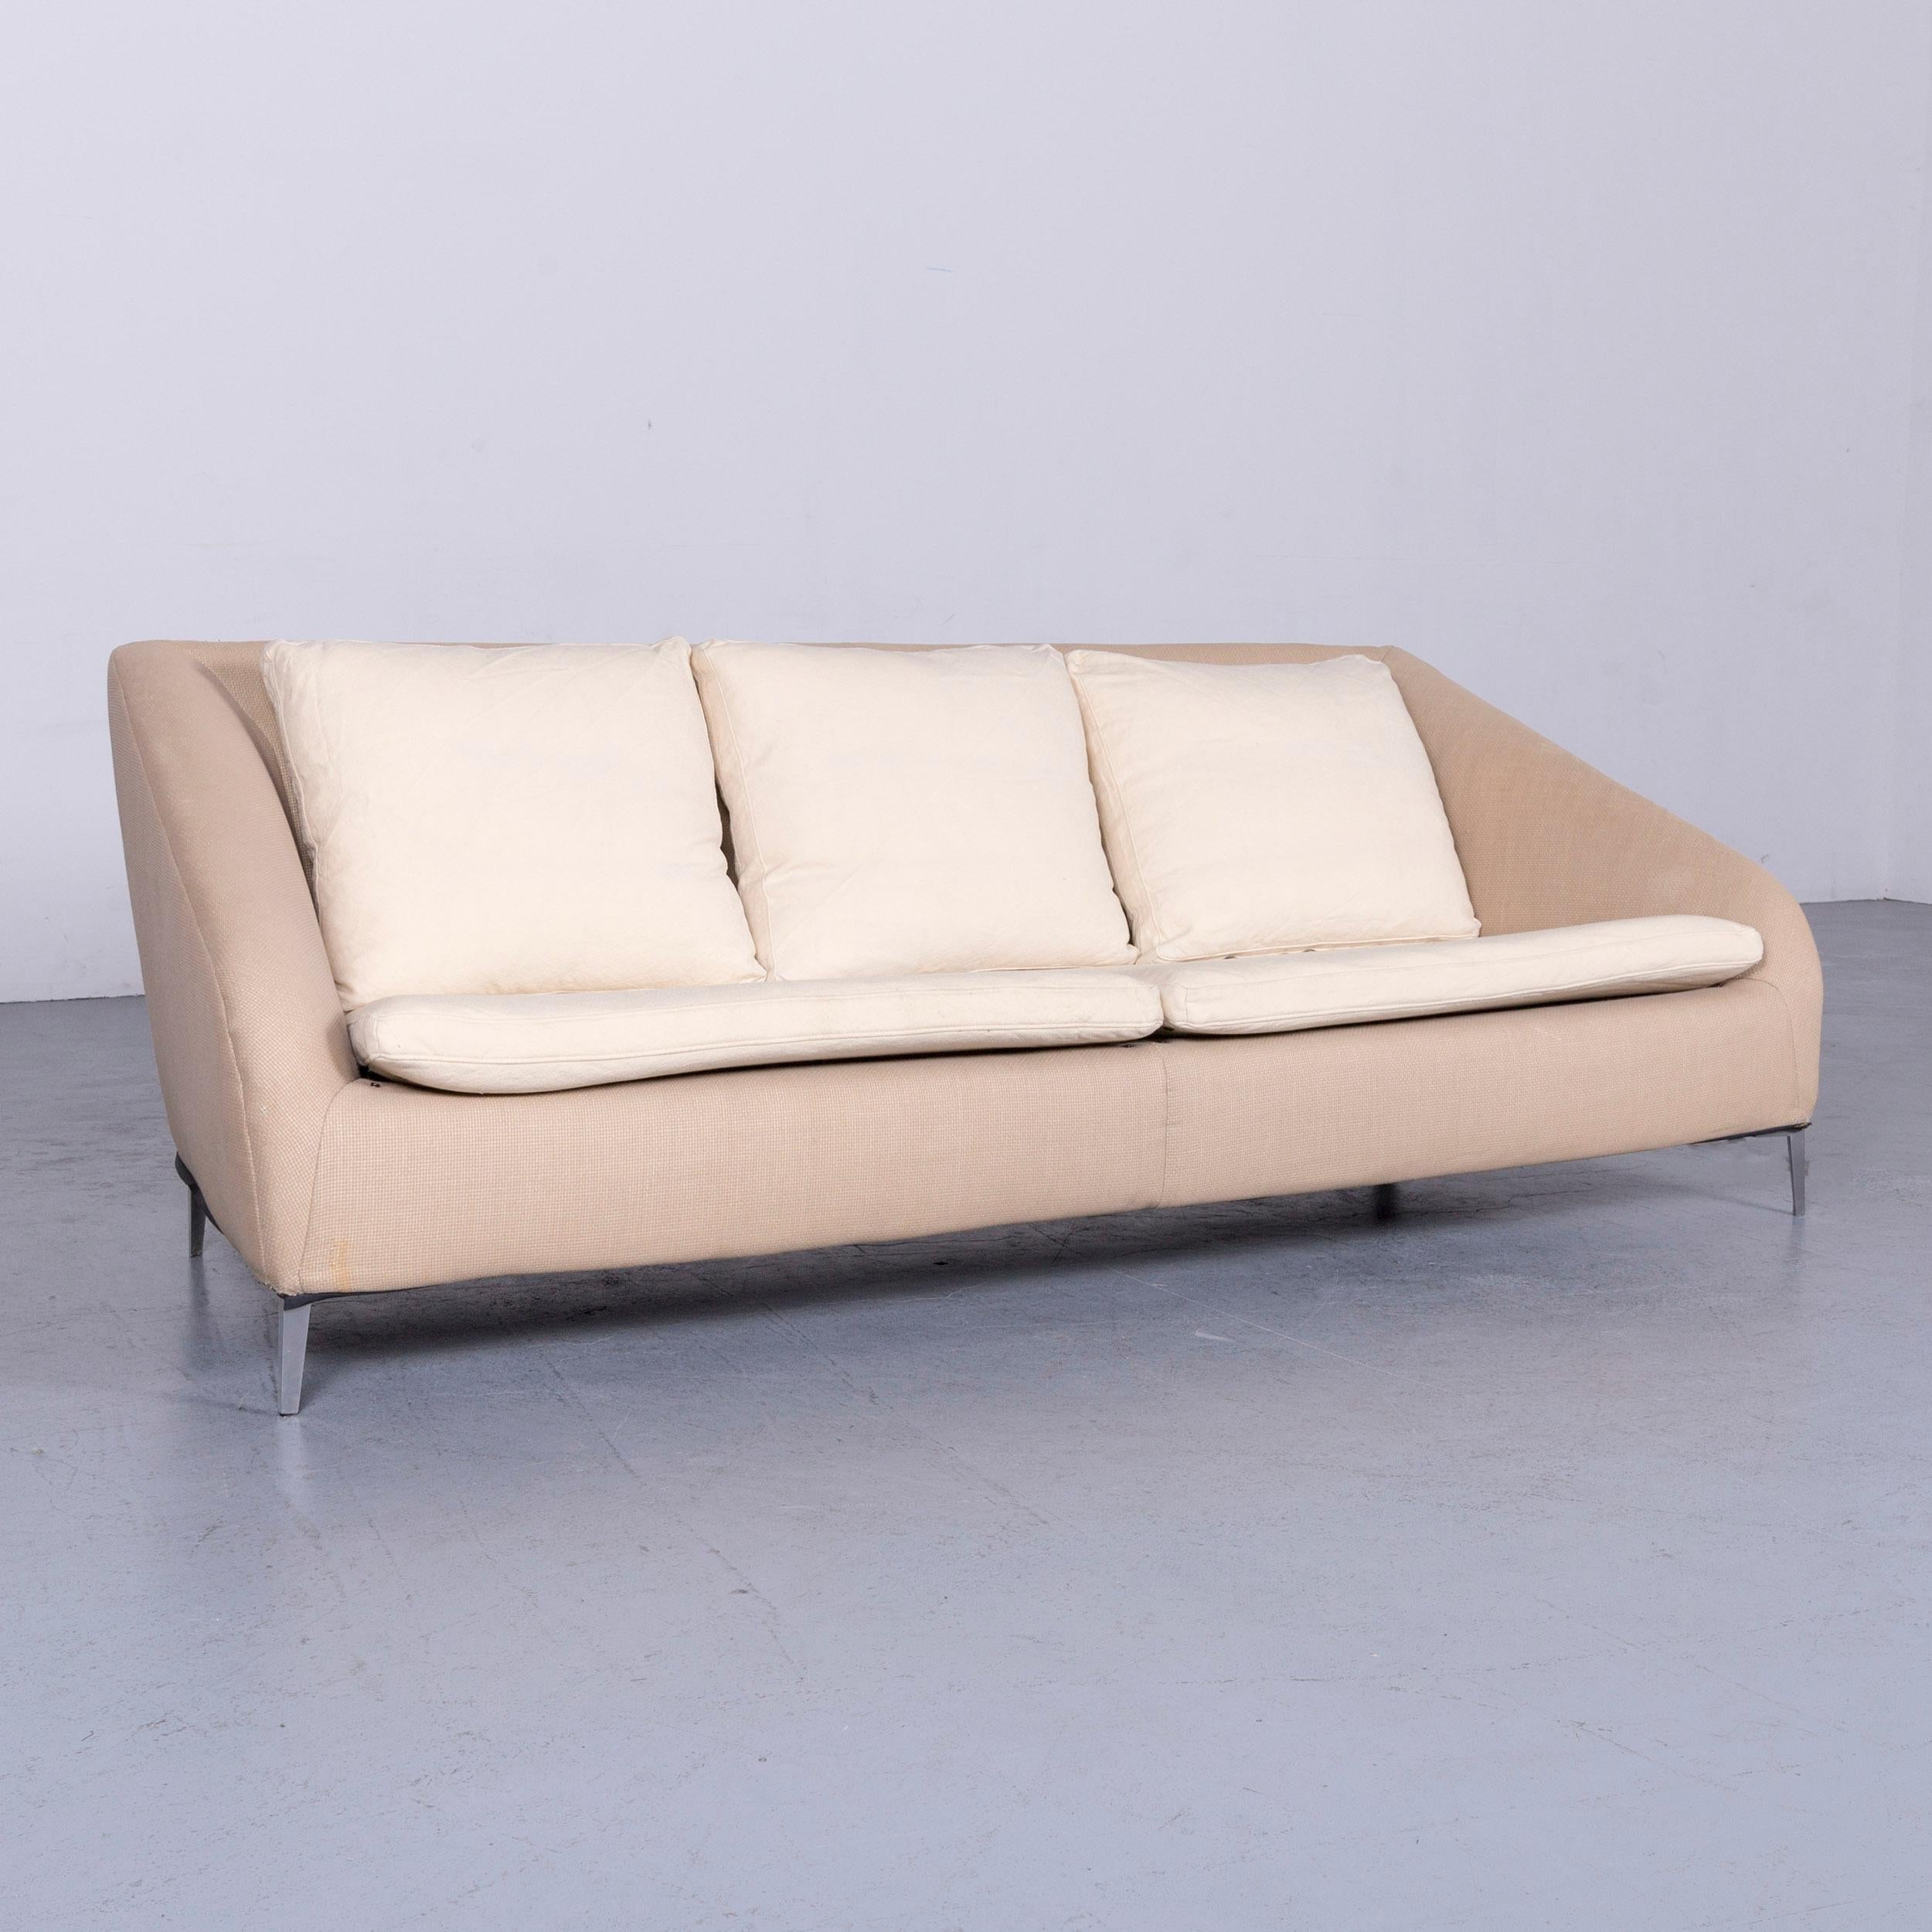 We bring to you an Ligne Roset designer fabric sofa brown beige three-seat couch.


























